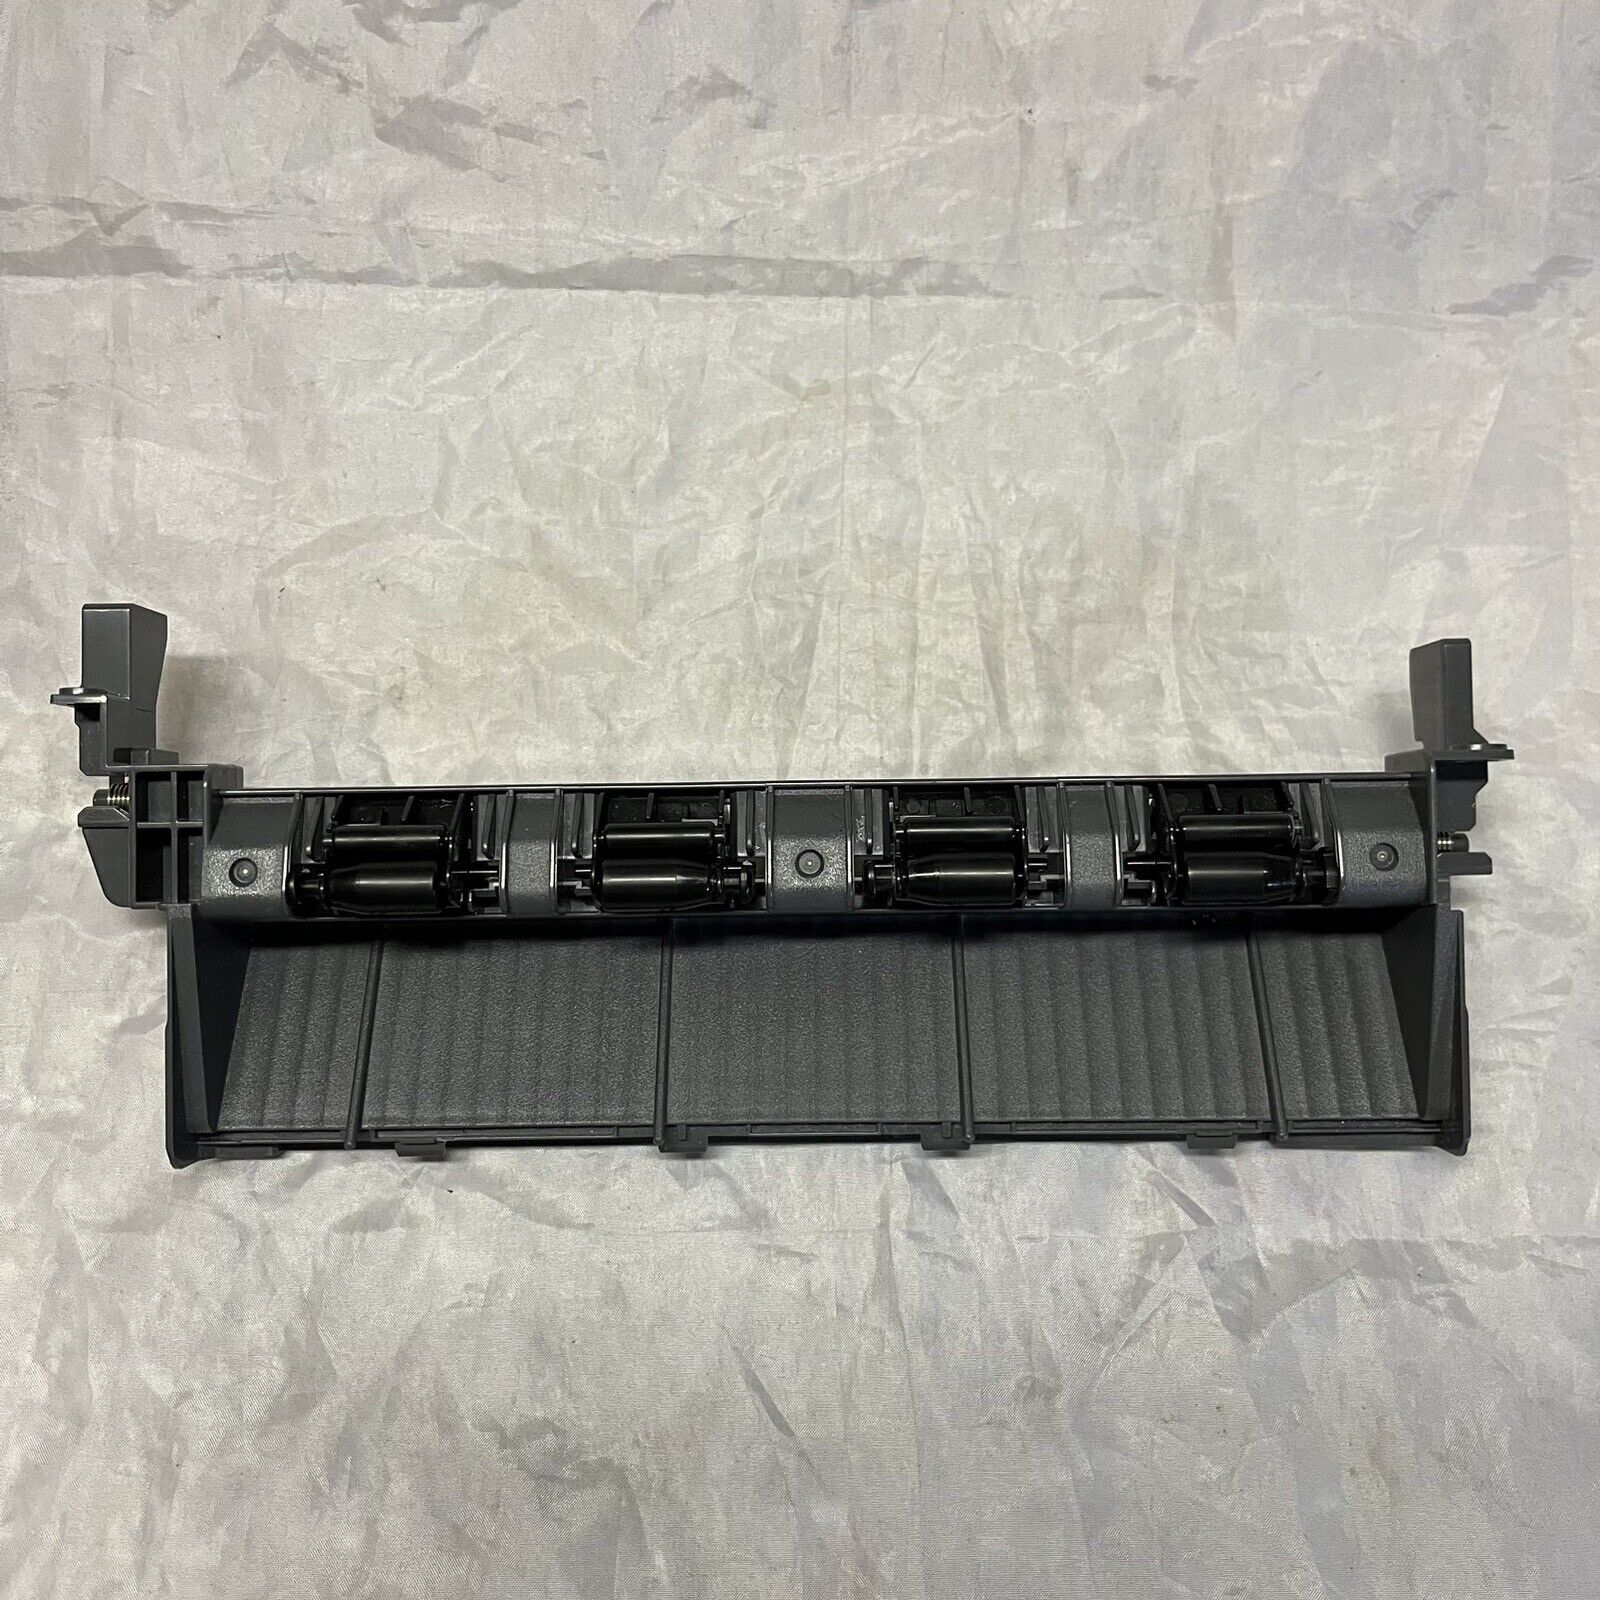 Genuine Brother Printer Part INNER CHUTE ASSEMBLY LY9131